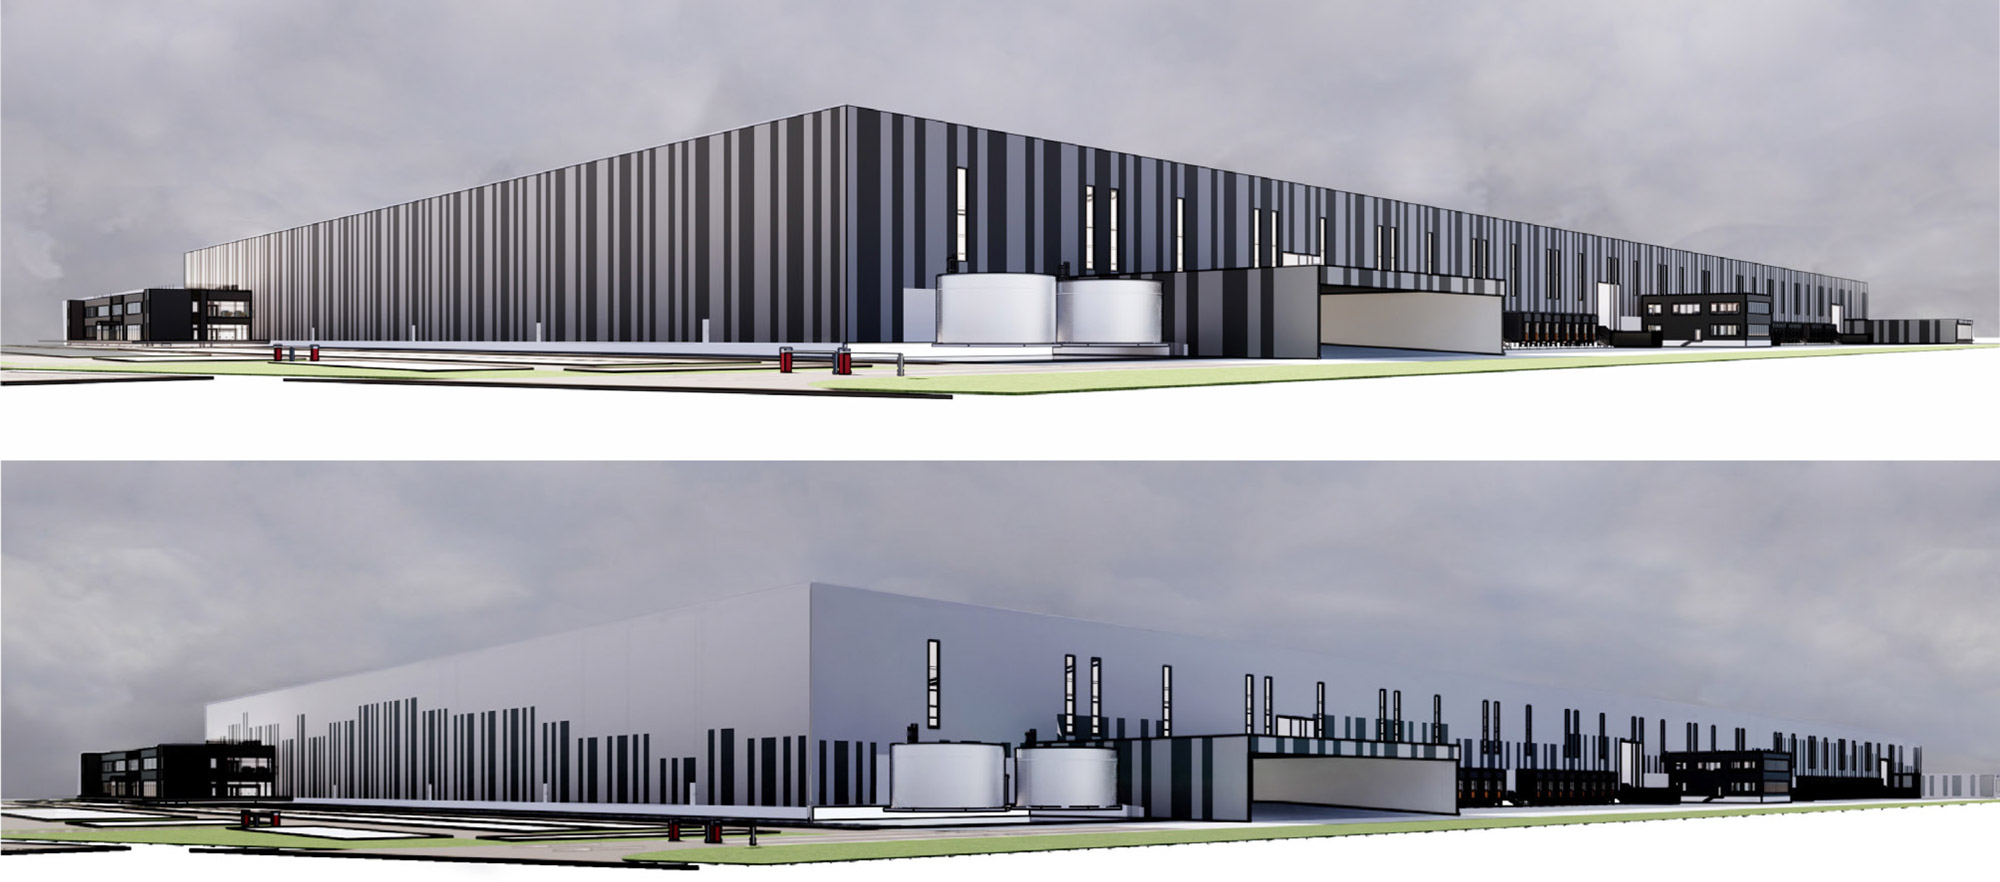 DSV corporate cladding strategy (top) and revised DSV cladding strategy for Thrapston (bottom)